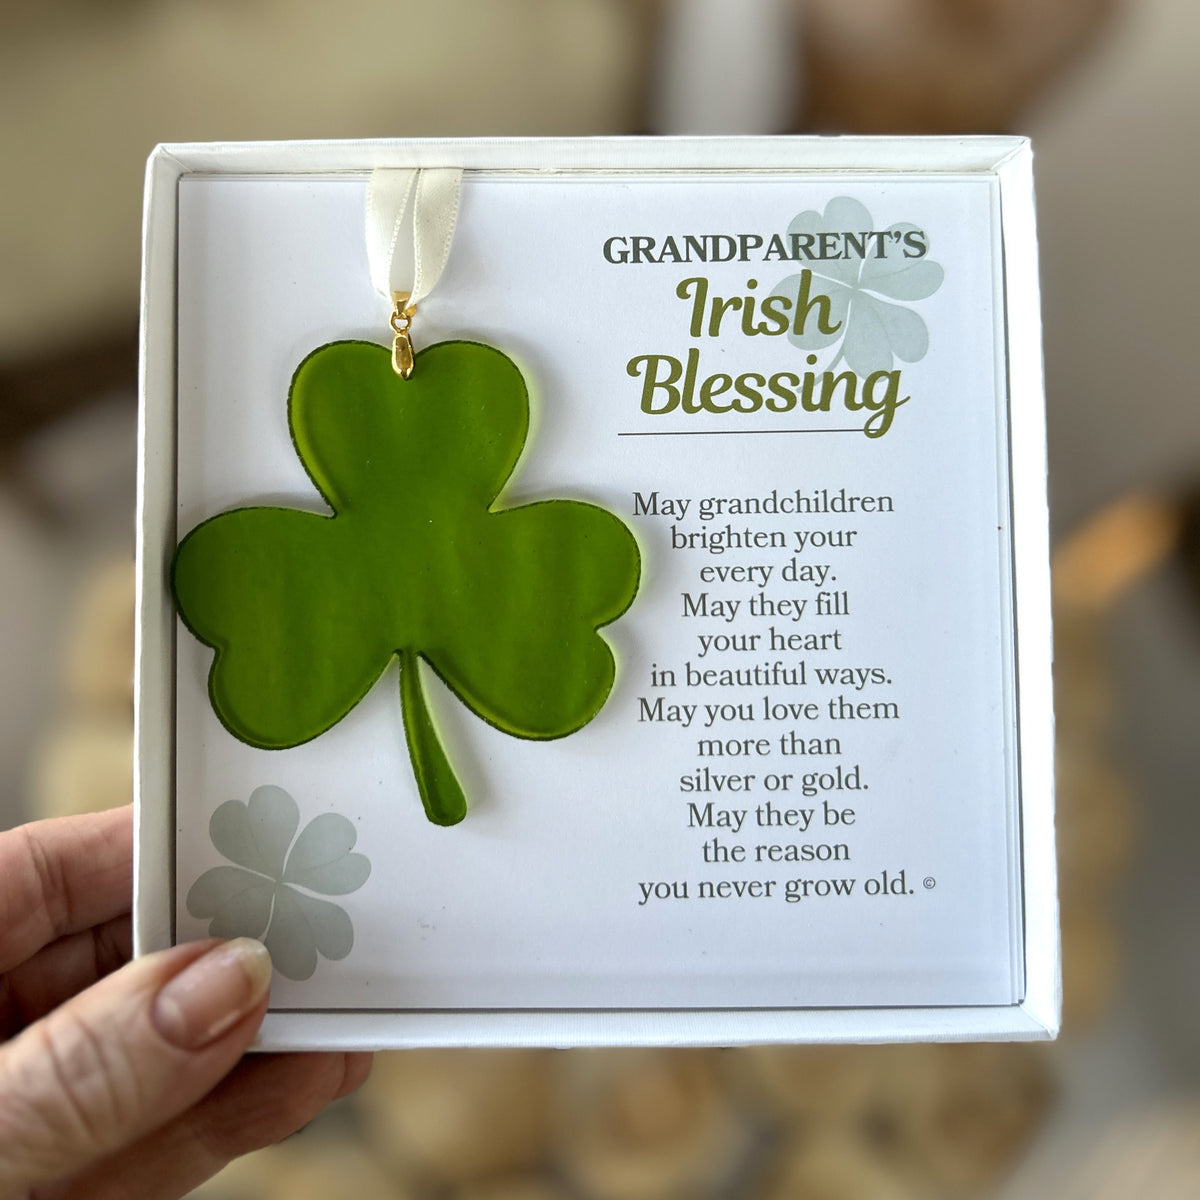 Grandparent&#39;s Irish Blessing gift being held in a hand.